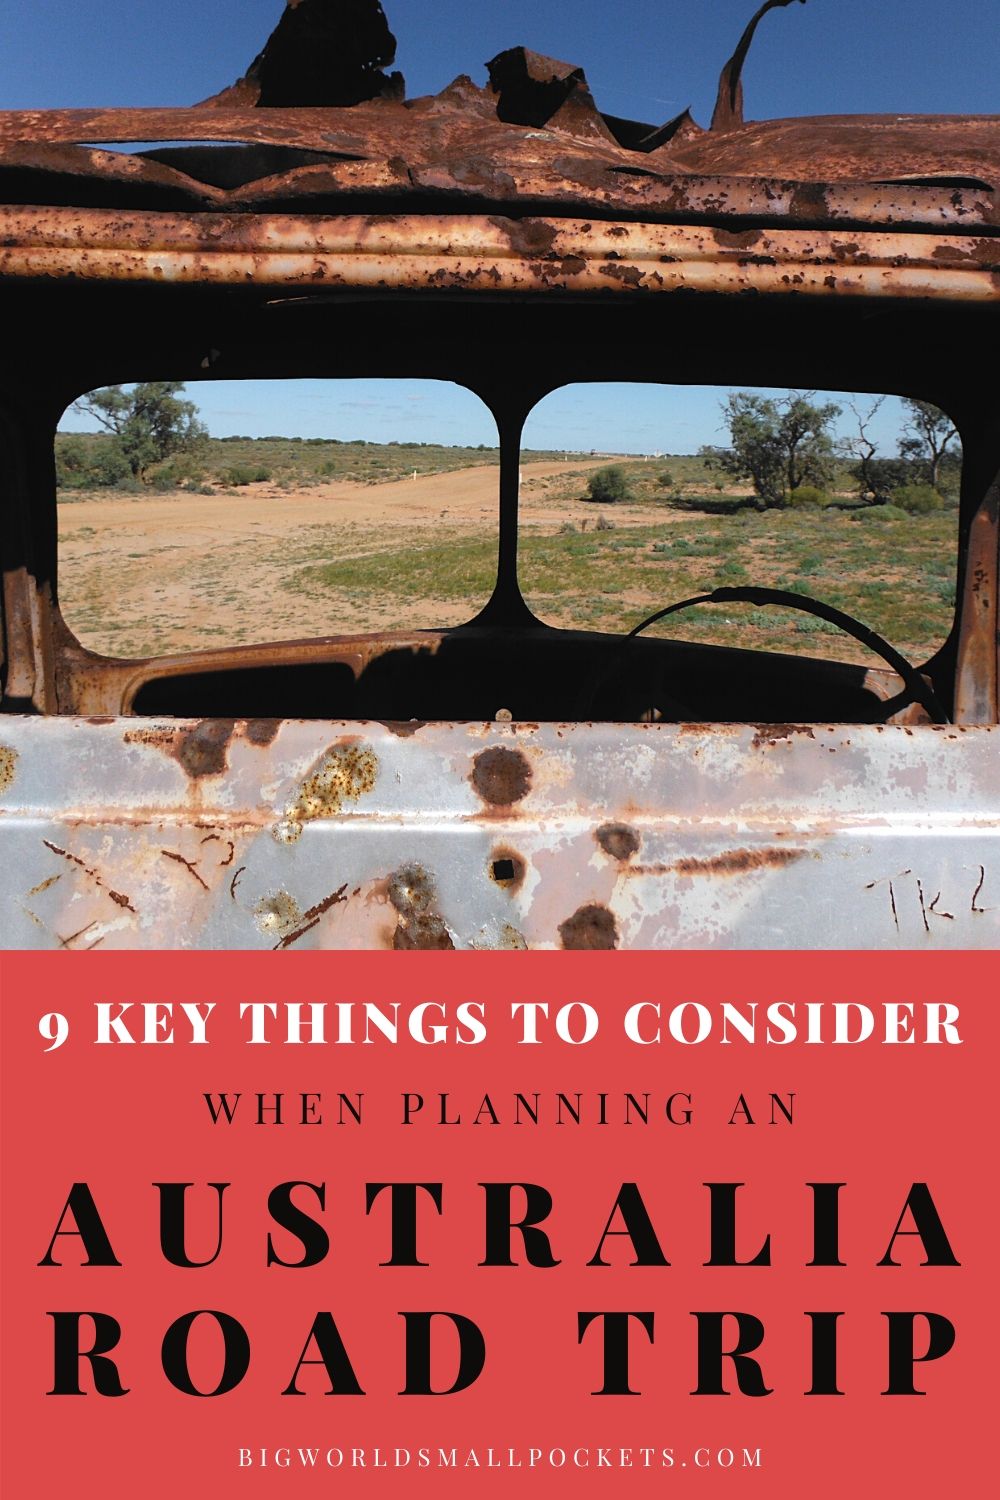 Top 9 Things to Consider When Planning Your Australian Road Trip Adventure